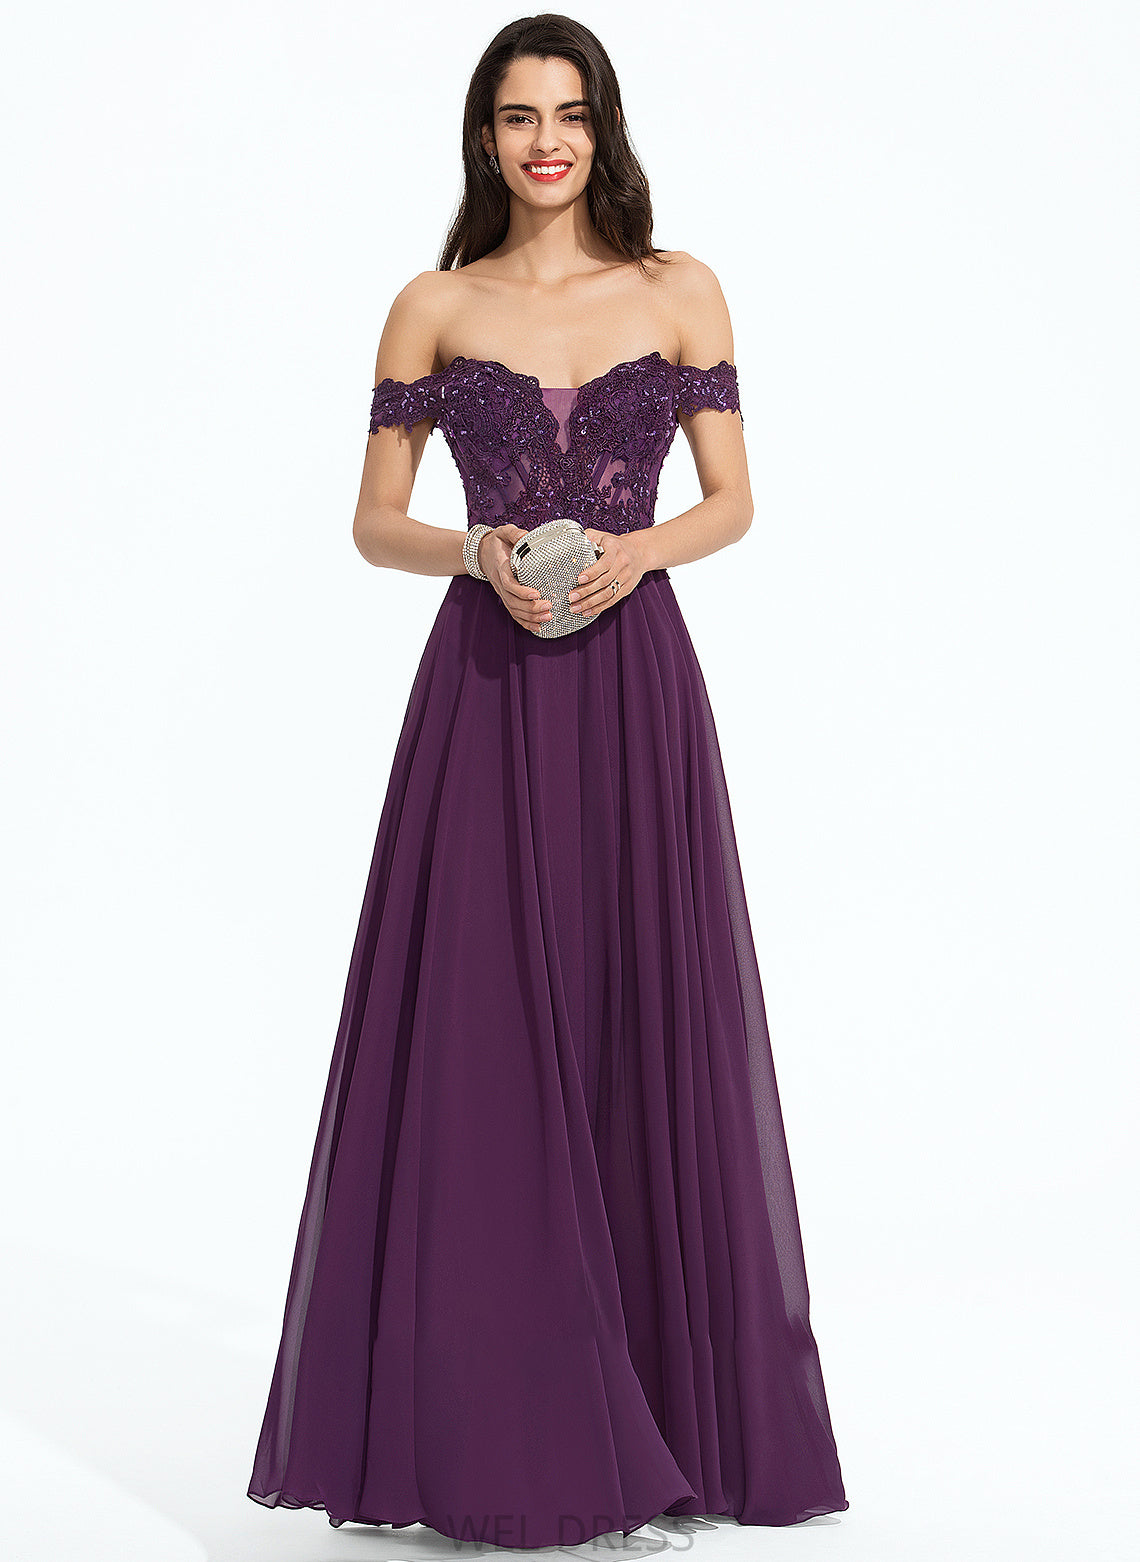 Ball-Gown/Princess Floor-Length Off-the-Shoulder With Lauren Prom Dresses Beading Sequins Chiffon